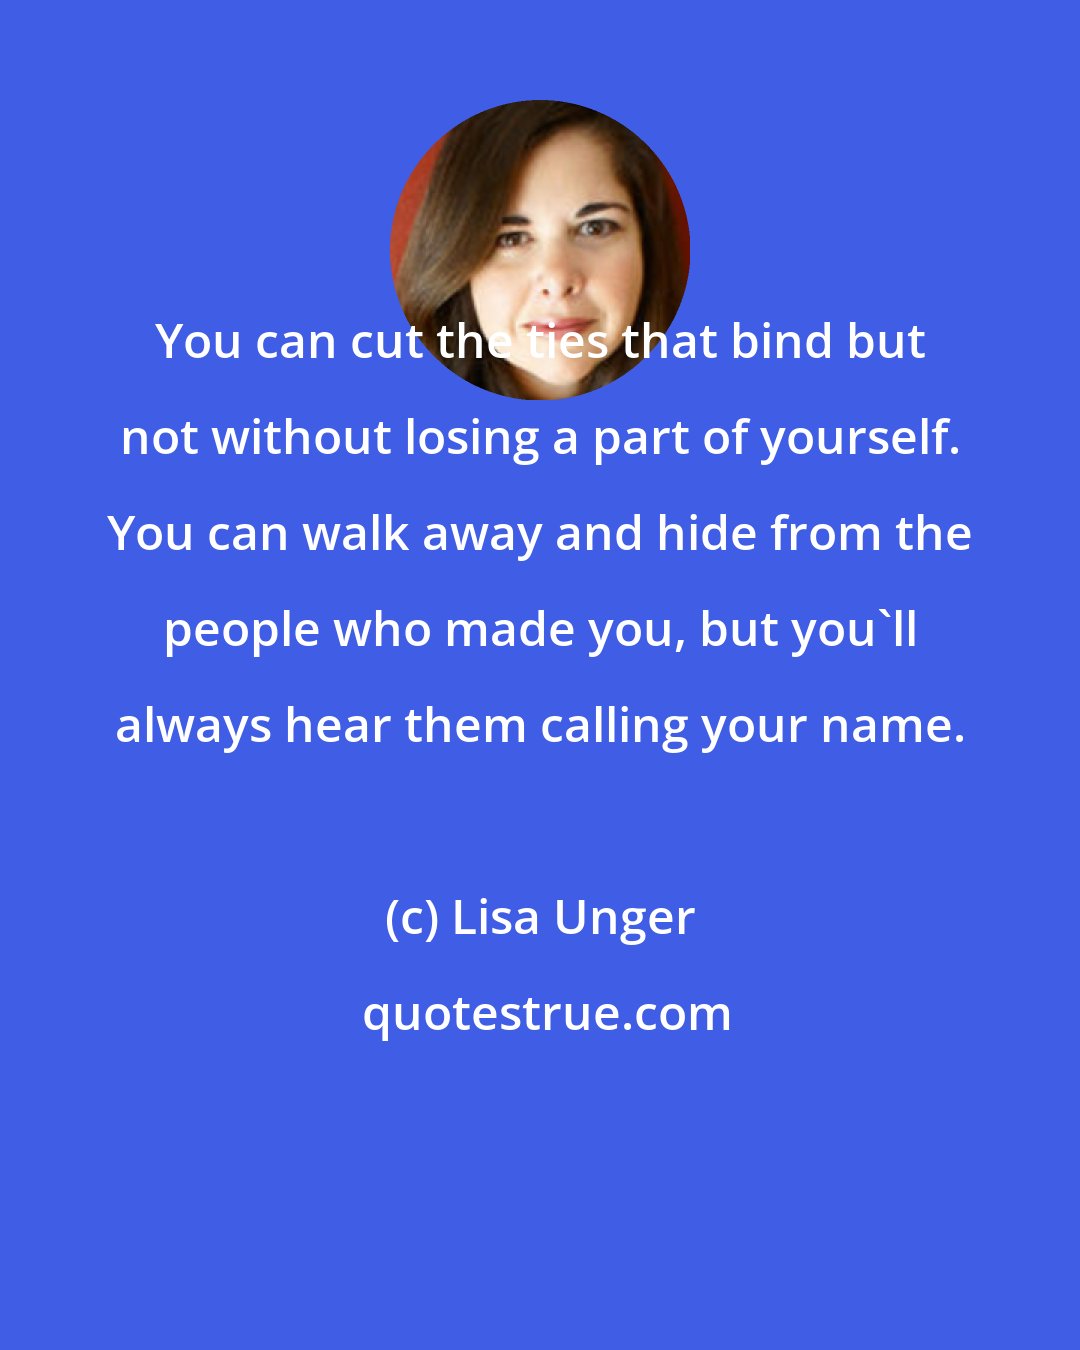 Lisa Unger: You can cut the ties that bind but not without losing a part of yourself. You can walk away and hide from the people who made you, but you'll always hear them calling your name.